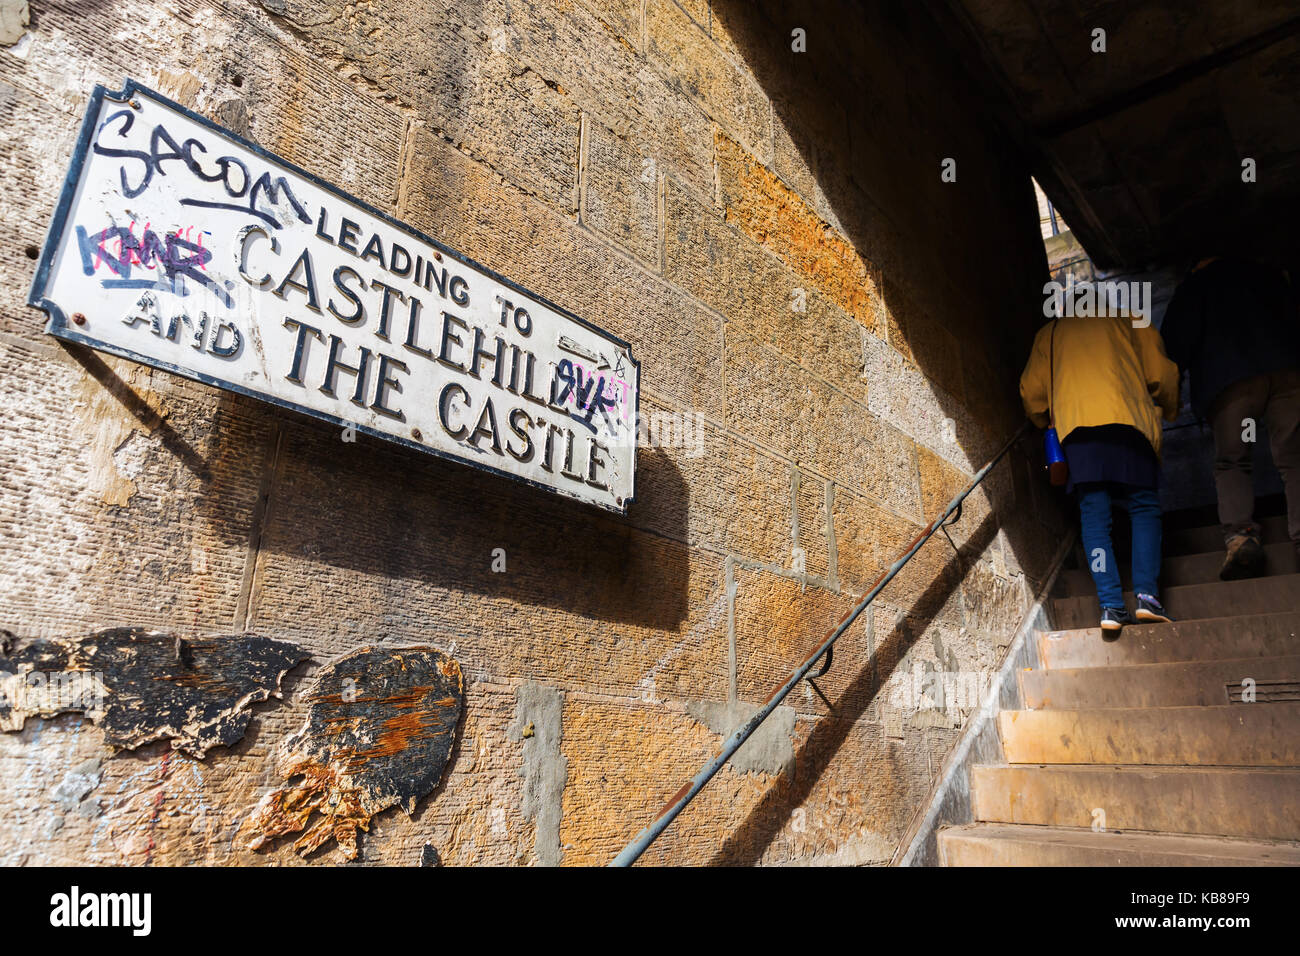 Edinburgh, Scotland, UK - September 11, 2106: underpath with stairs in the Old Town with unidentified people. The old town with many Reformation-era b Stock Photo